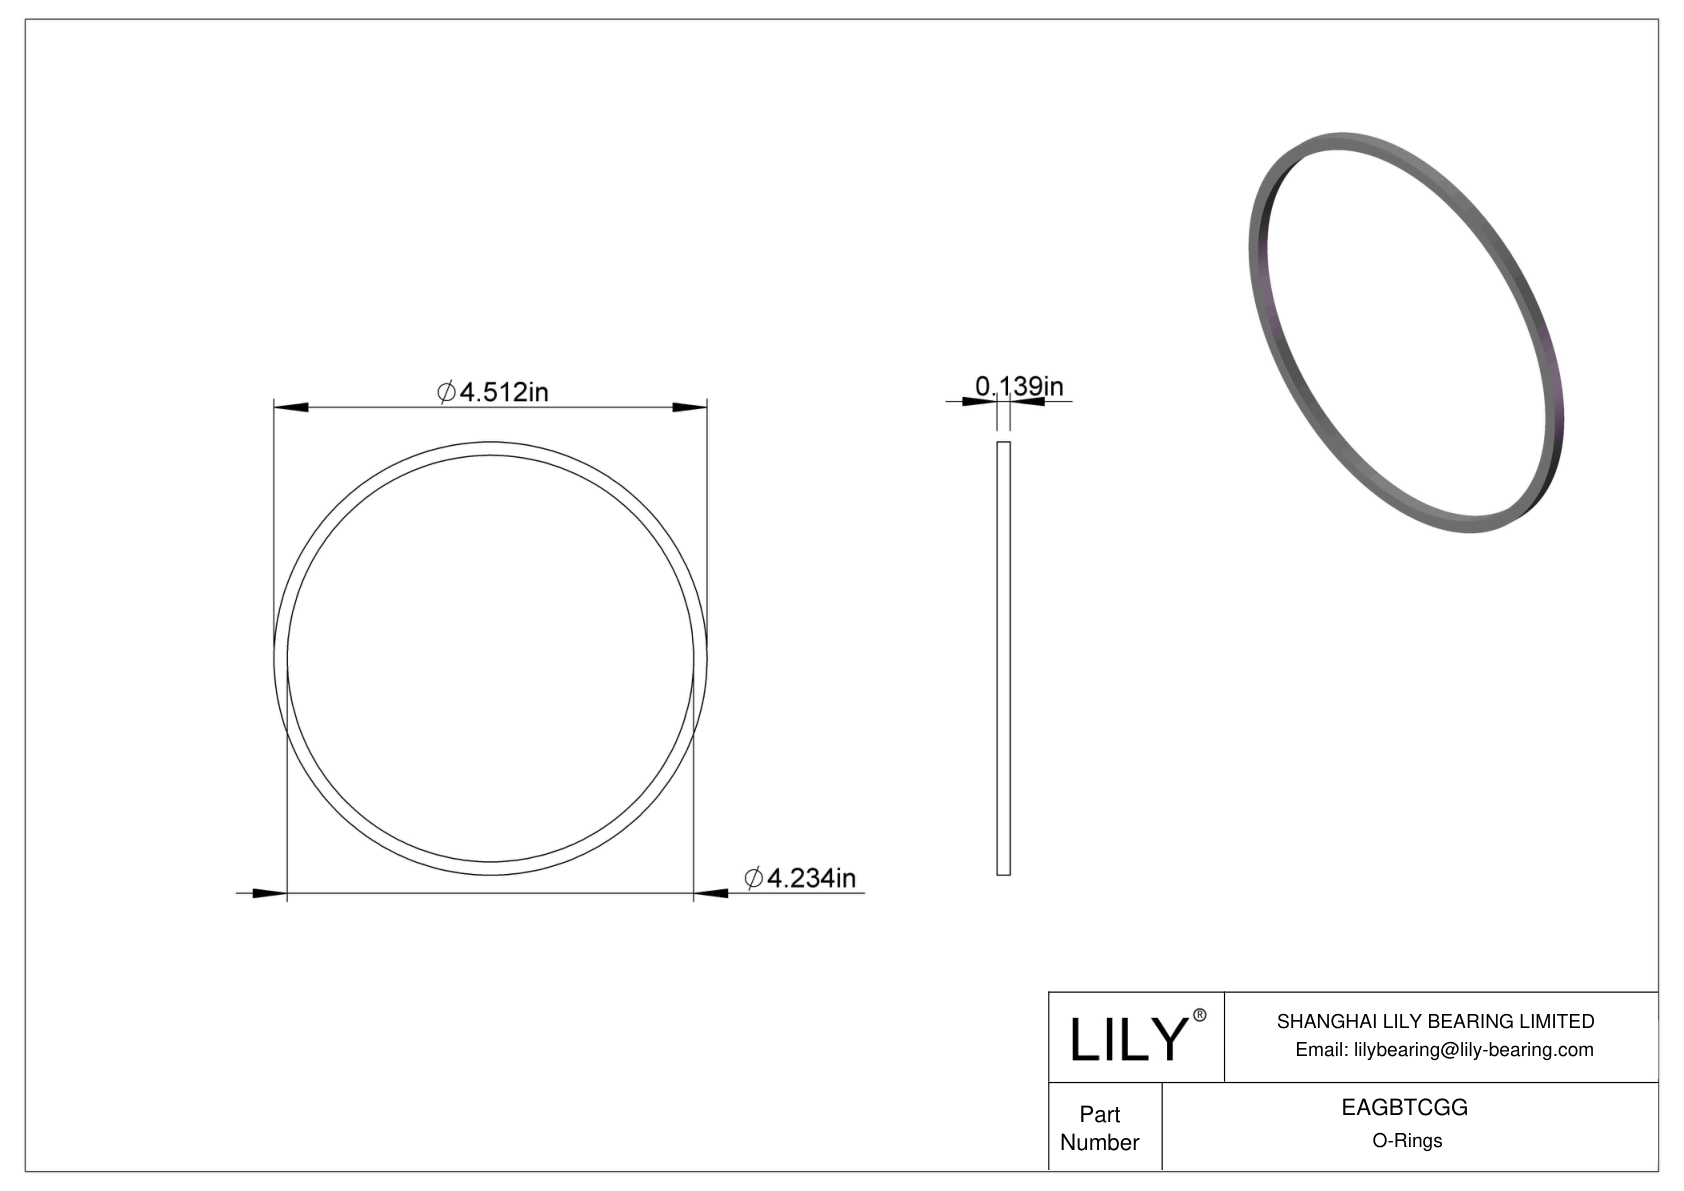 EAGBTCGG Oil Resistant O-Rings Square cad drawing